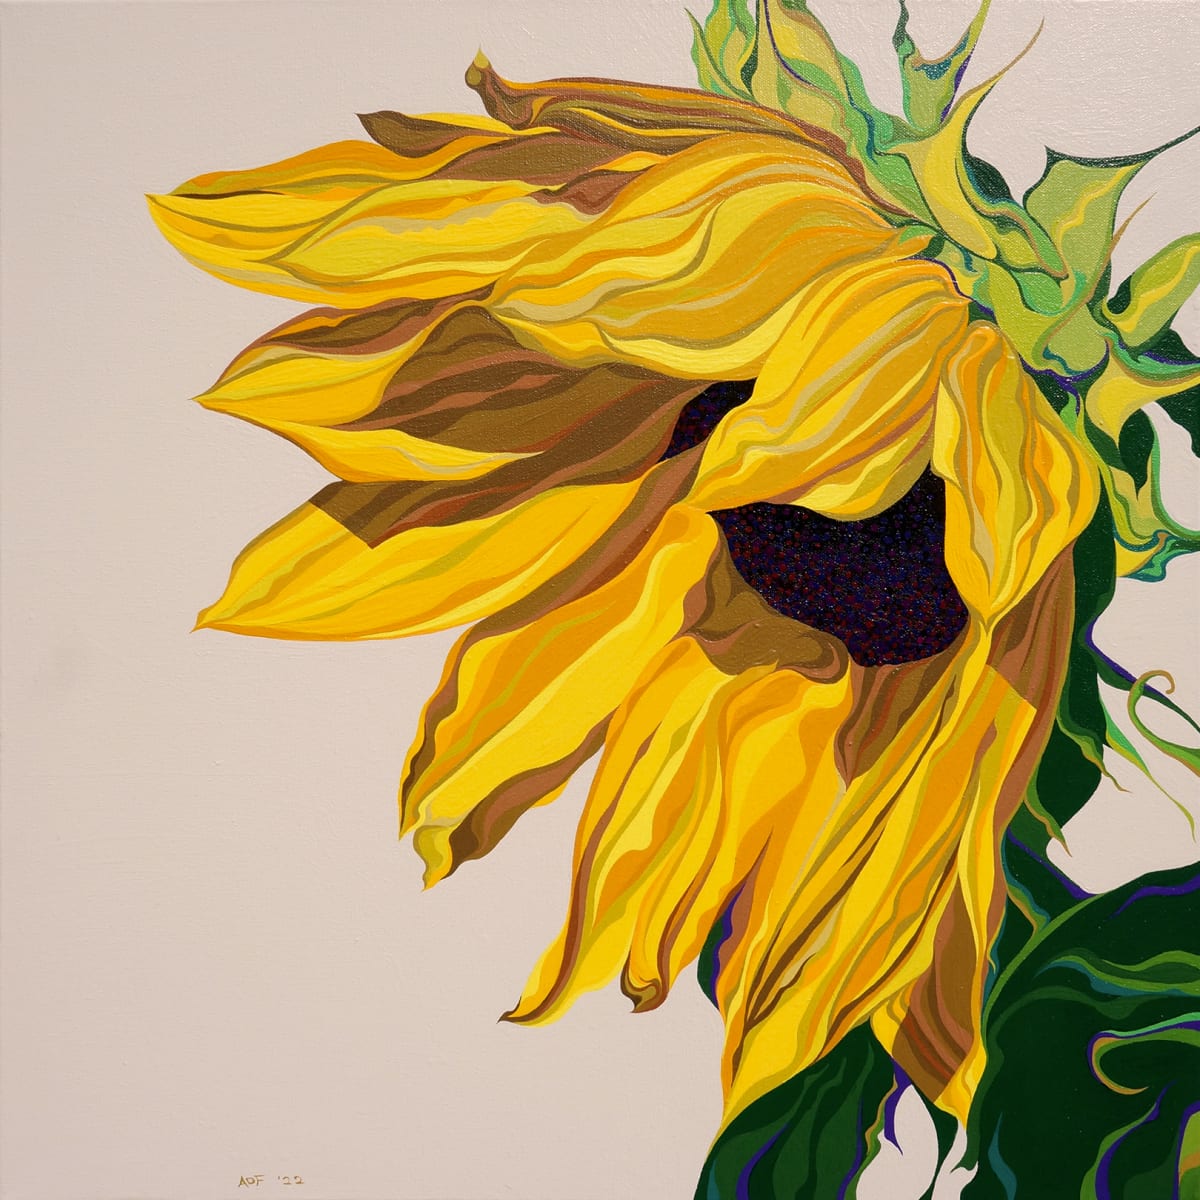 Sun Siesta by Amy Ferrari  Image: Seems like the sunflower is taking a rest from the blaring sunshine.